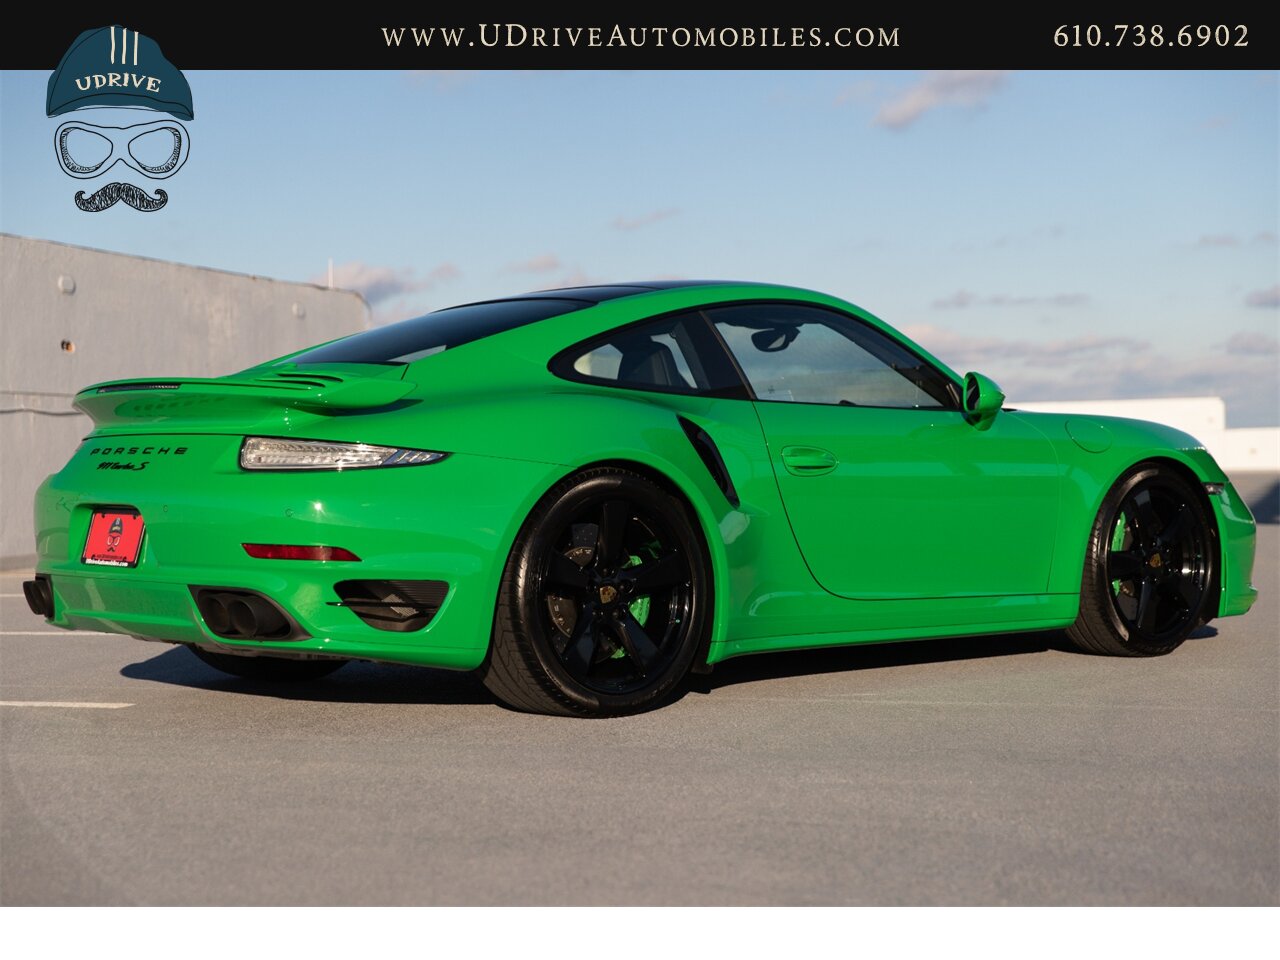 2016 Porsche 911 Turbo S PTS Viper Green Aerokit $203k MSRP  Painted Side Skirts Painted Grilles Wheels in Black - Photo 17 - West Chester, PA 19382